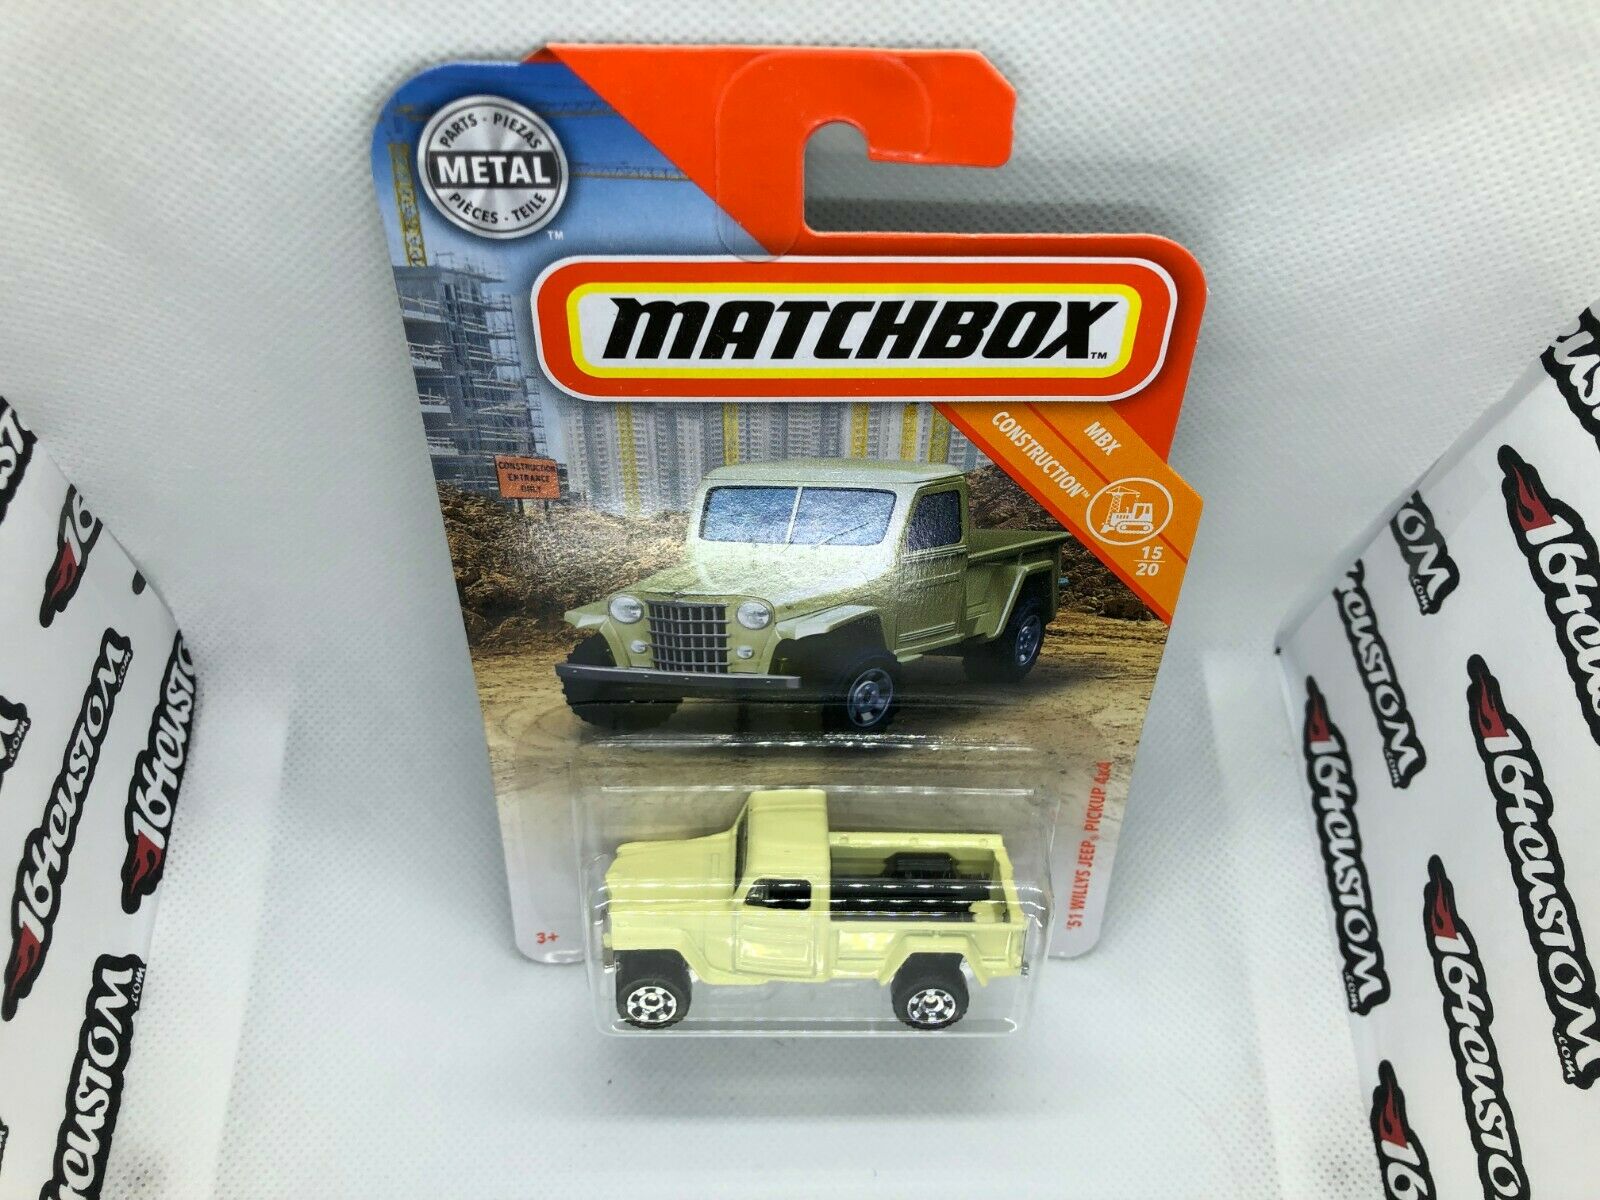 51 Willys Jeep Pickup 4x4 Hot Wheels